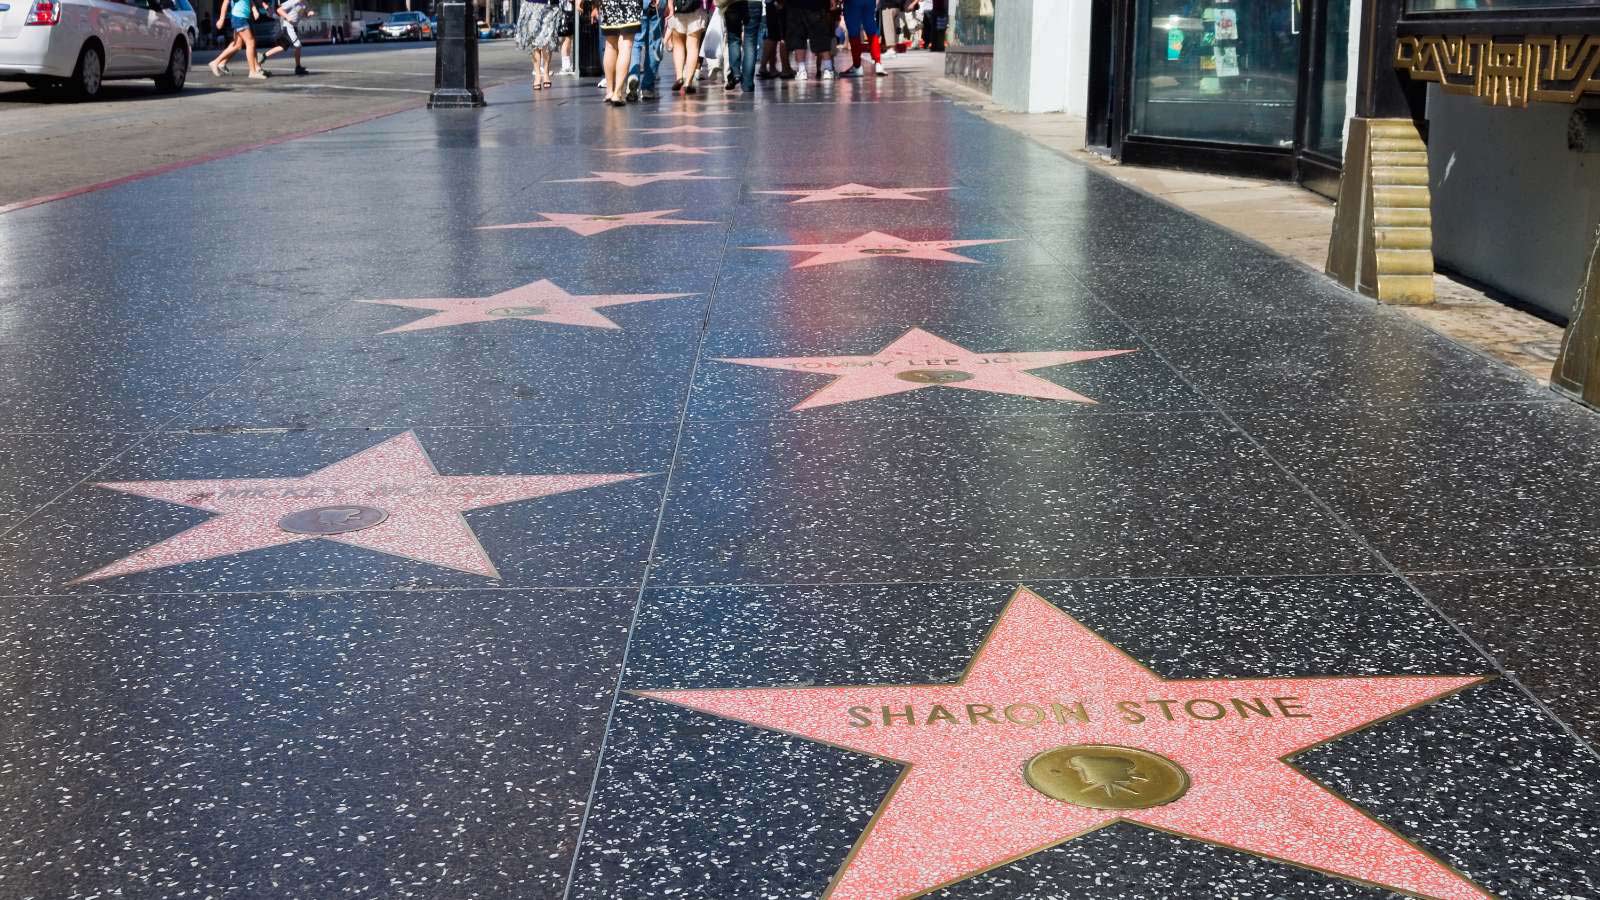 <p>The Hollywood Walk of Fame is a sidewalk that features the stars of famous actors, musicians, and other celebrities. It’s a fun place to visit and to see the stars of some of your favorite celebrities.</p>